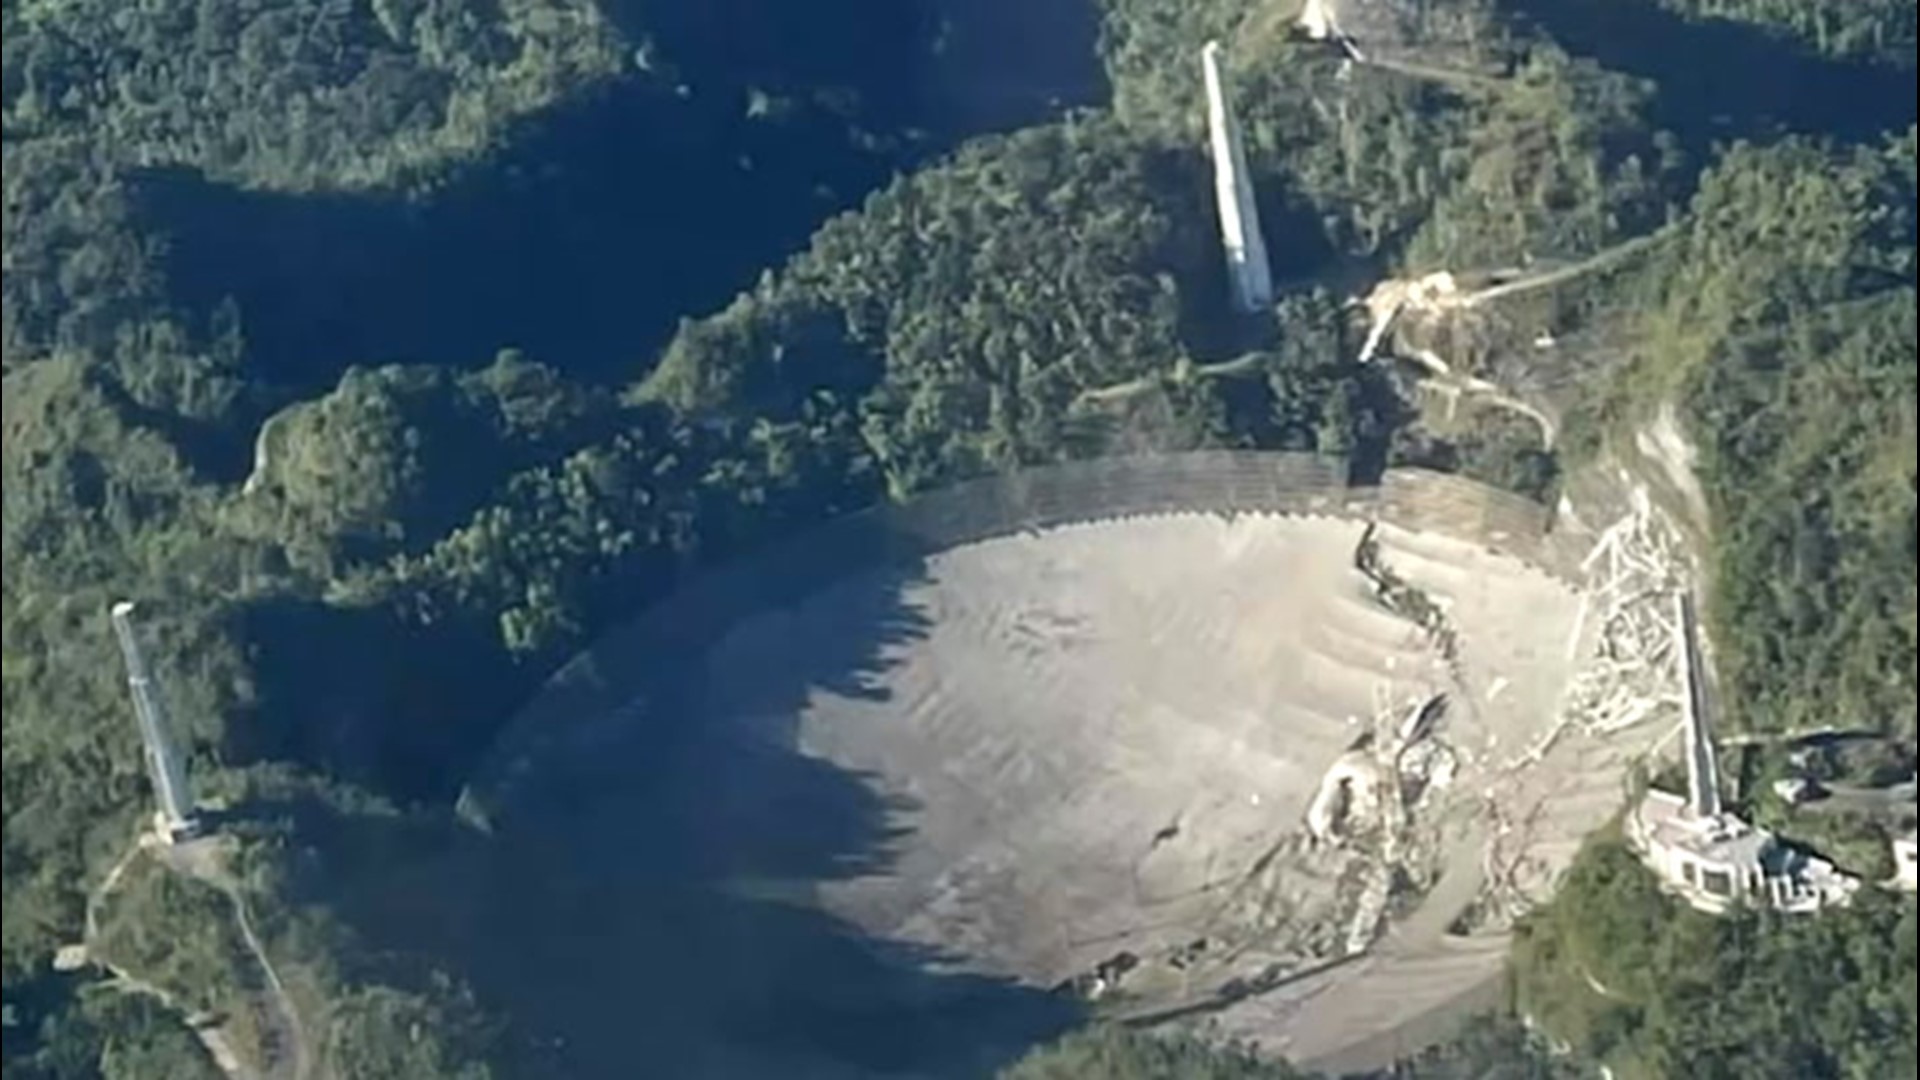 The Arecibo Radio Telescope in Puerto Rico collapsed in the morning of Dec. 1, ending over a half-century of service in the astronomy community.